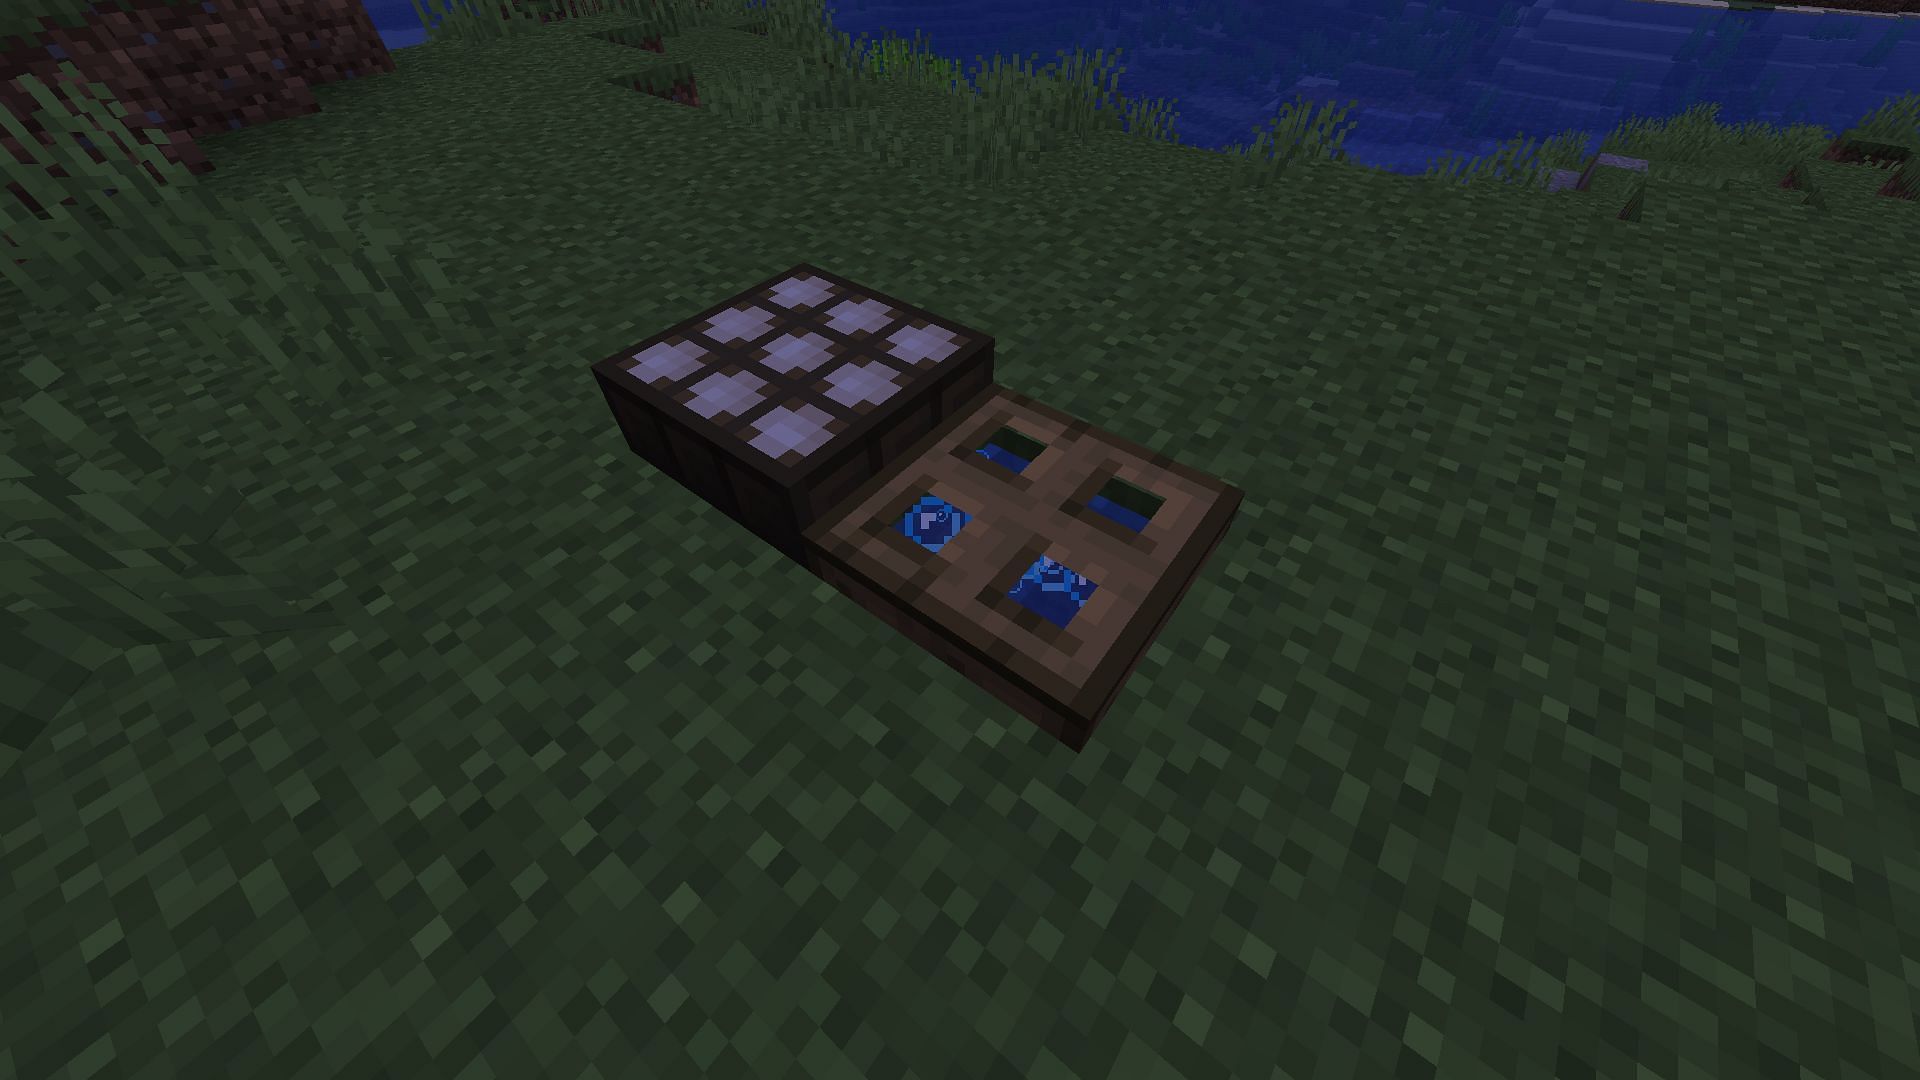 The trapdoor closes at night, which will be detected by the daylight detector (Image via Minecraft)